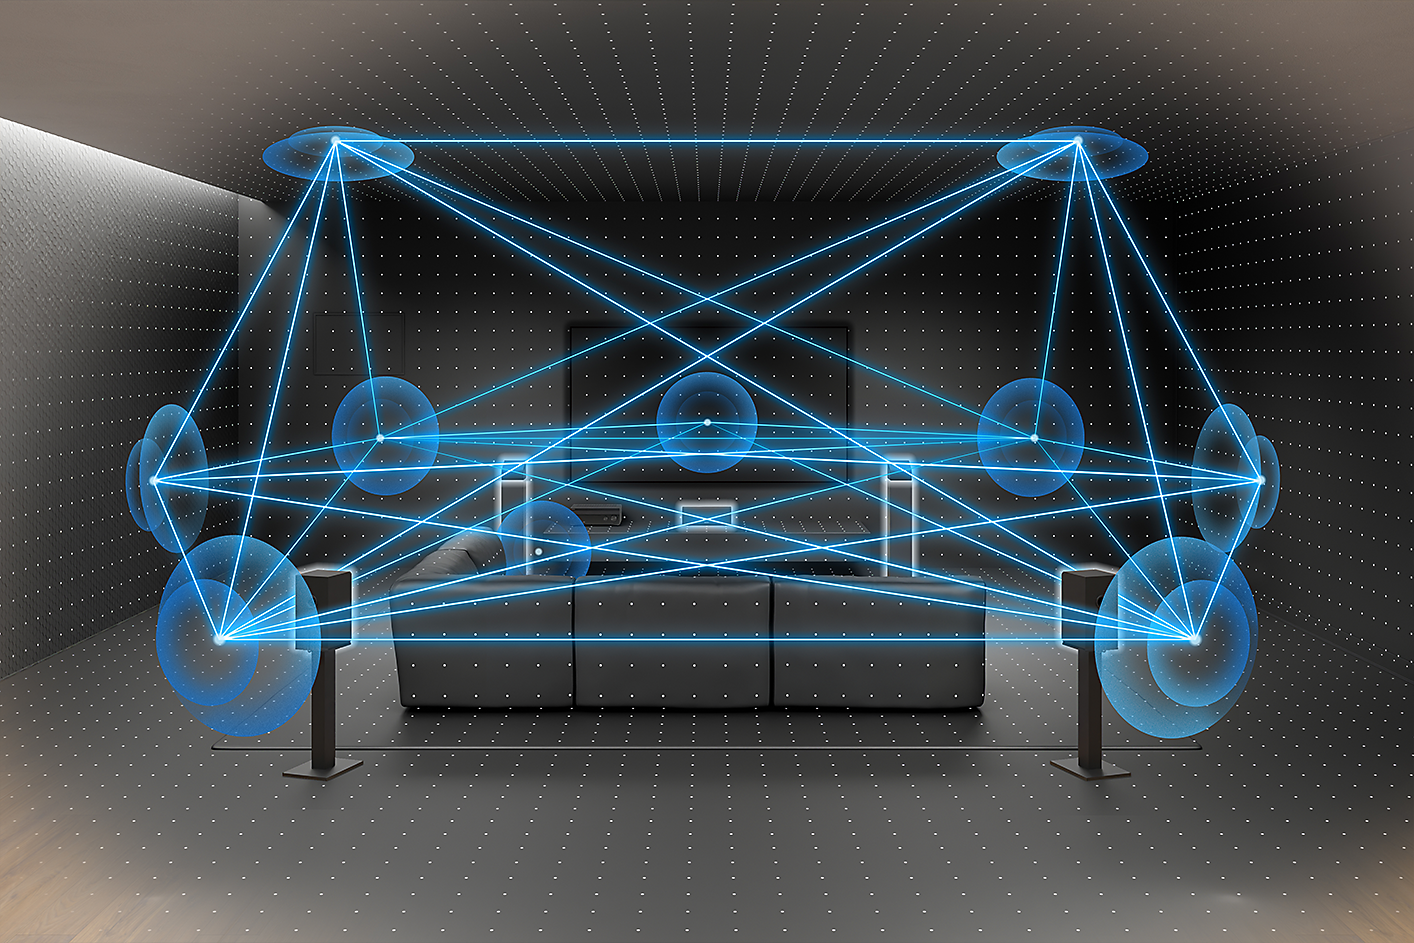 Image of a room with a sofa, TV and speakers. Multiple lines and circles demonstrate the movement of the sound